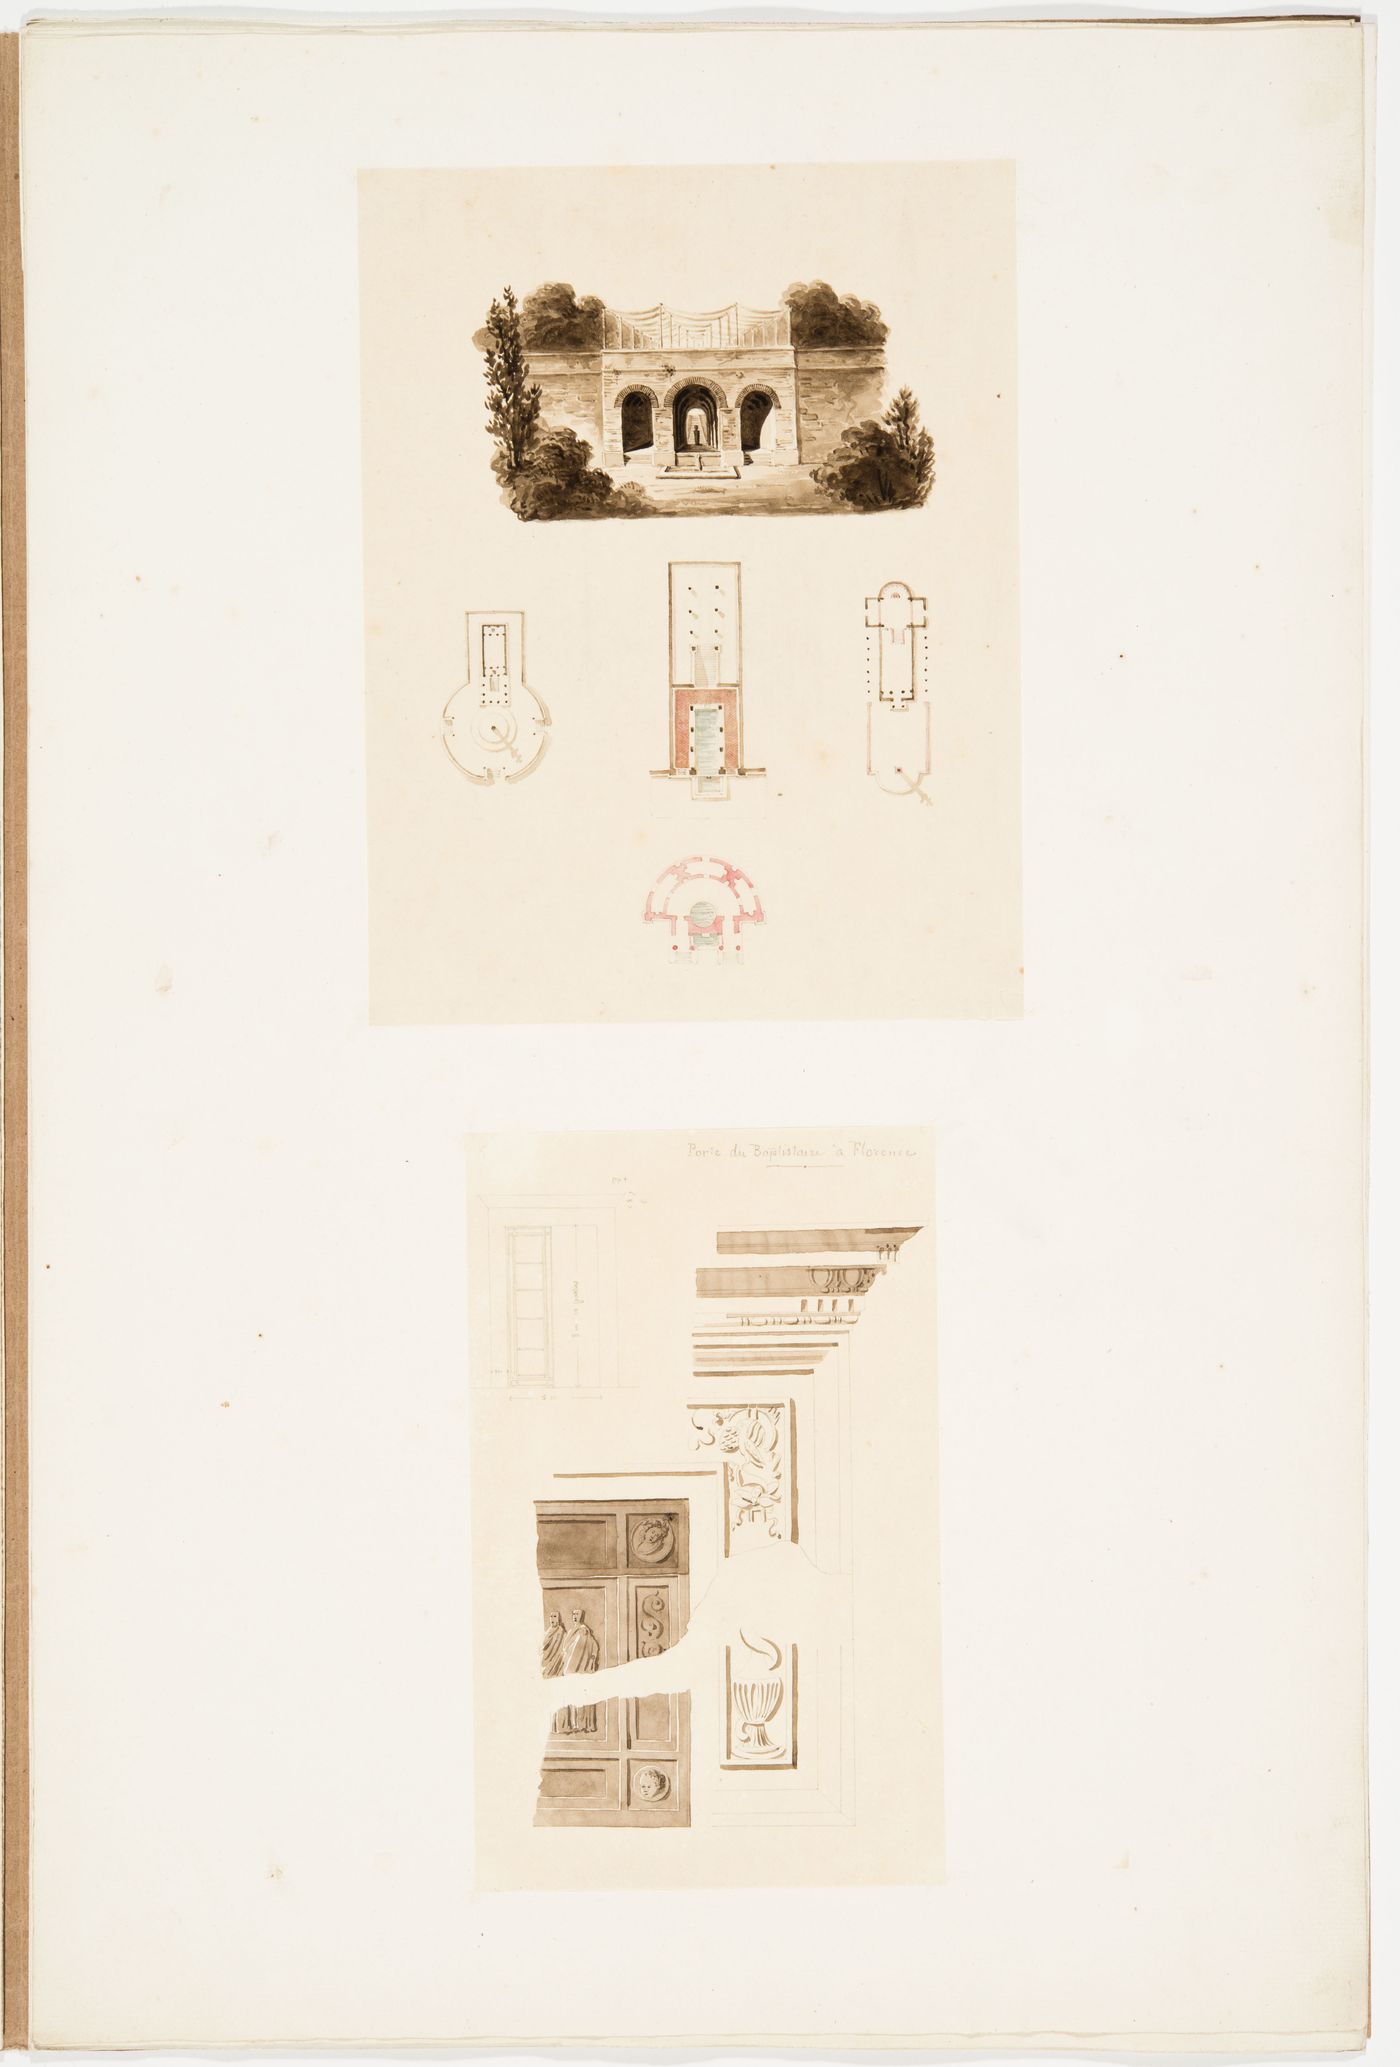 Front elevation of a triple archway entrance and plan of the corresponding building, with three plans of temple or apsidal audience hall type buildings; Schematic elevation and details of the Gates of Paradise from the Baptistry of San Giovanni, Florence